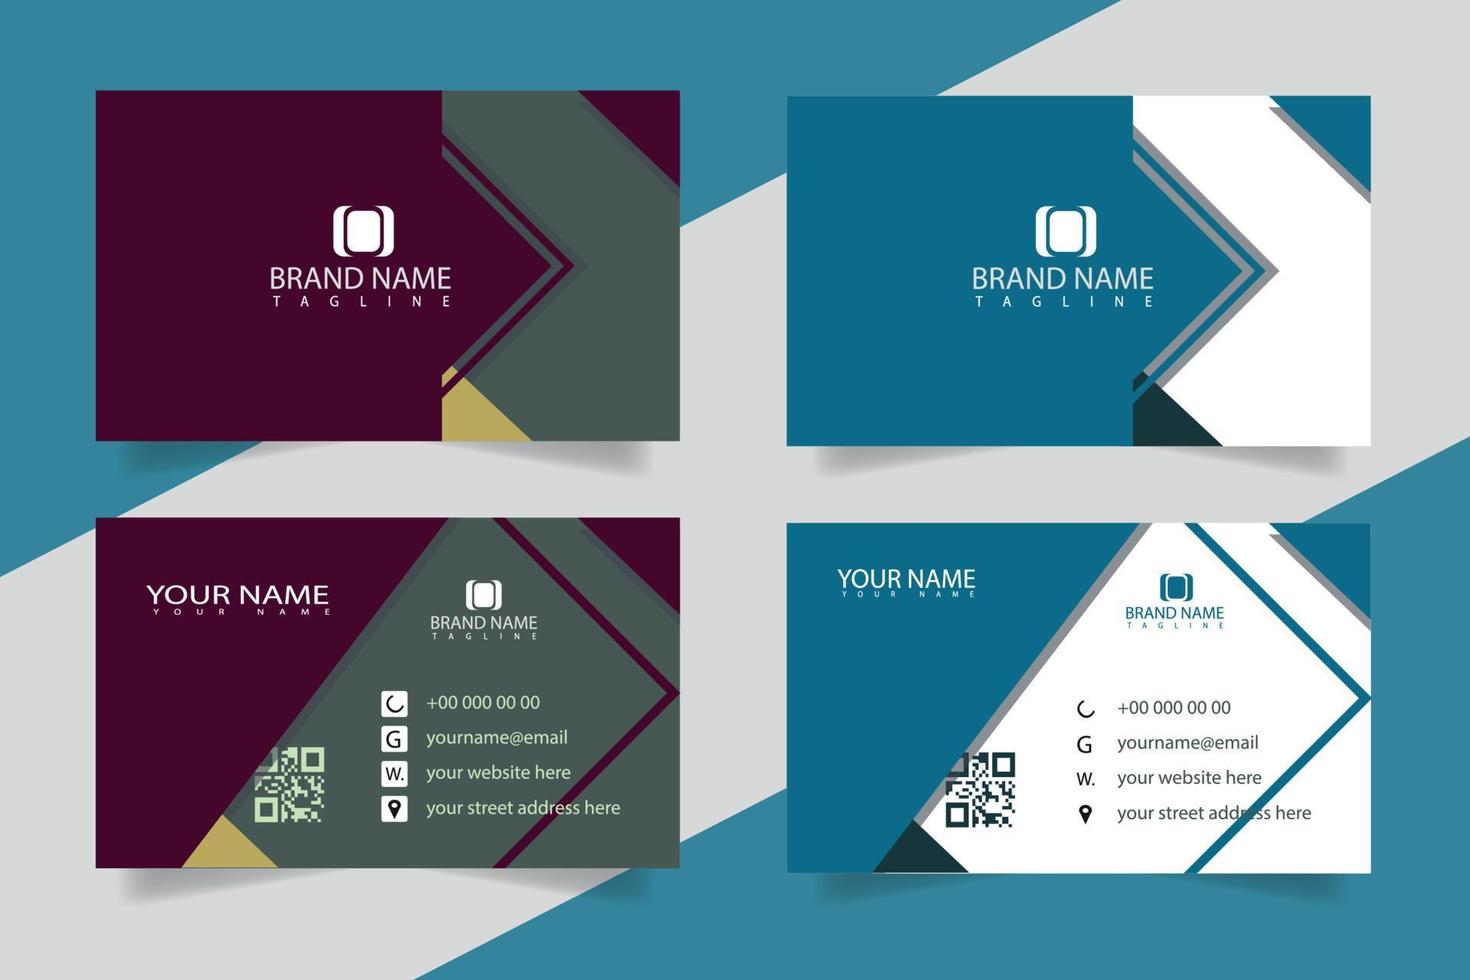 Visiting card or Business Card design template for personal or corporate use vector